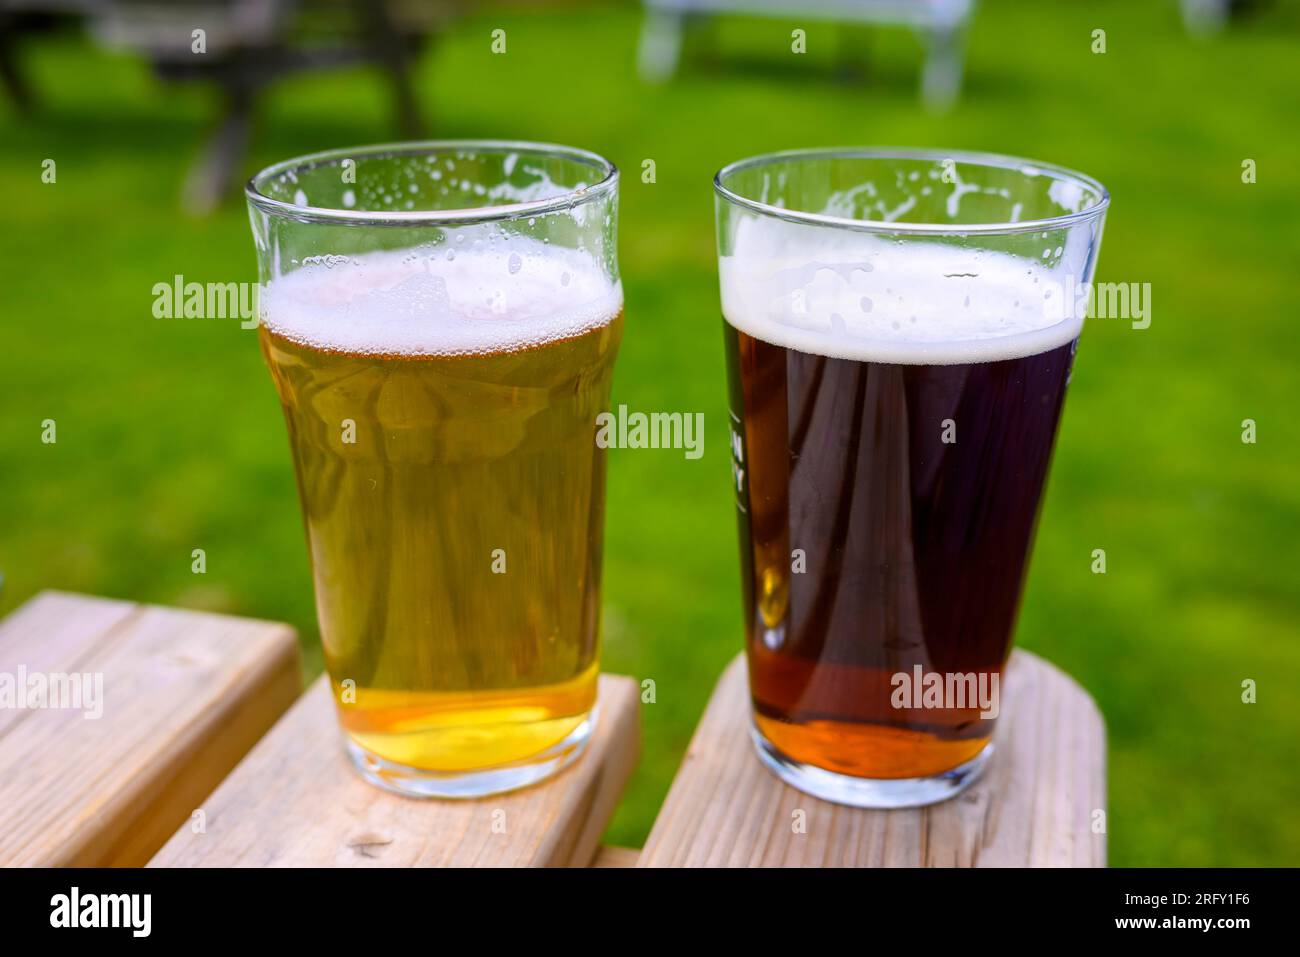 Two pints of beer on a table in a pub garden Stock Photo